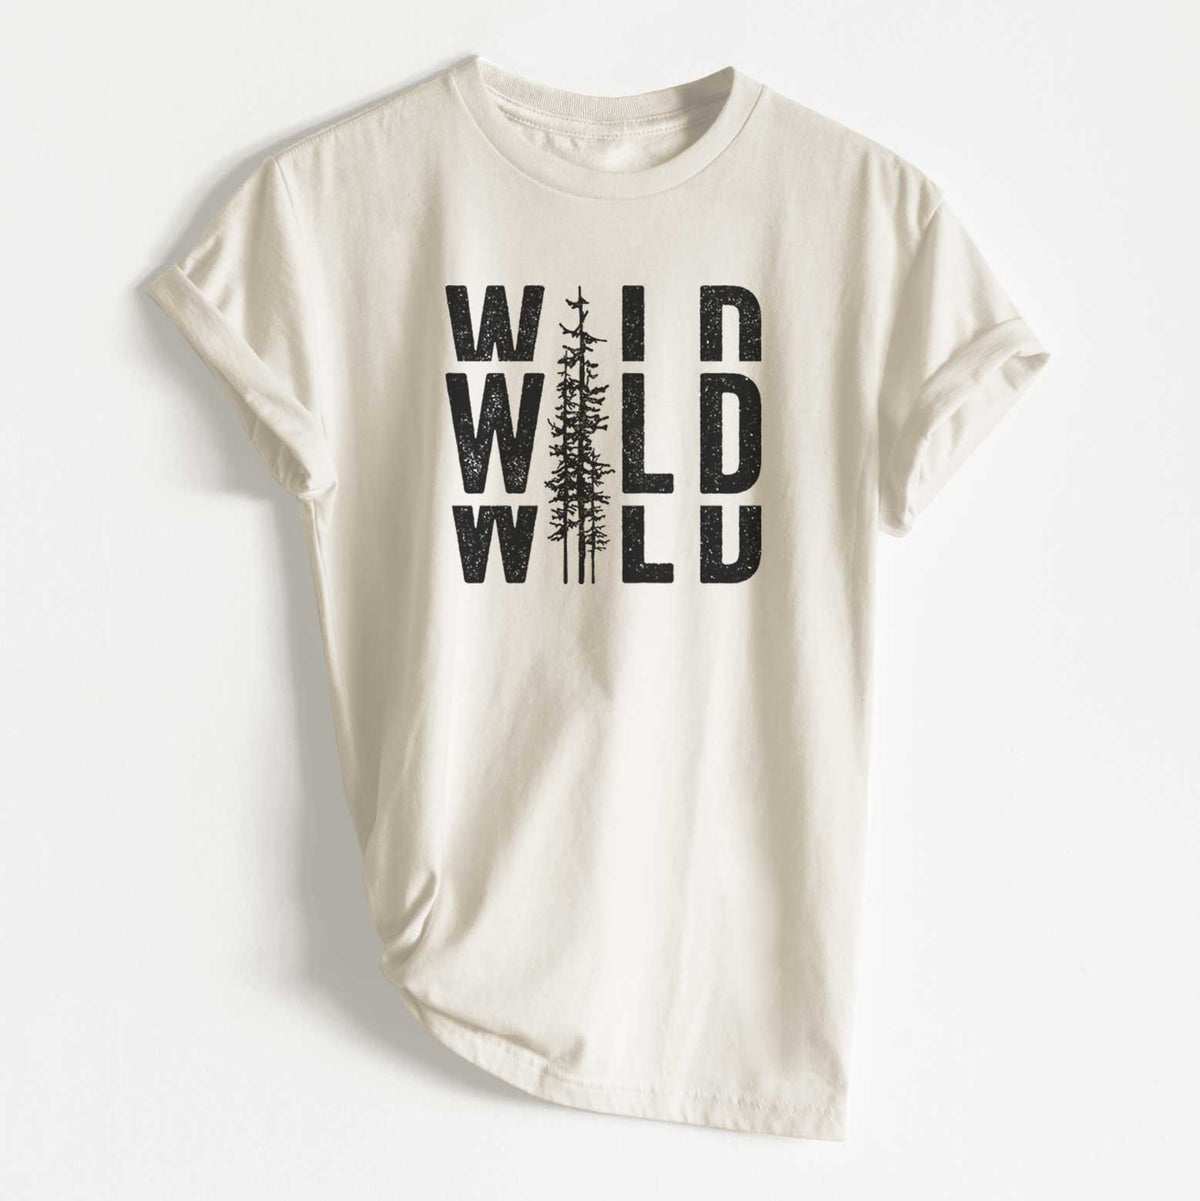 Wild - Unisex Recycled Eco Tee  - CLOSEOUT - FINAL SALE